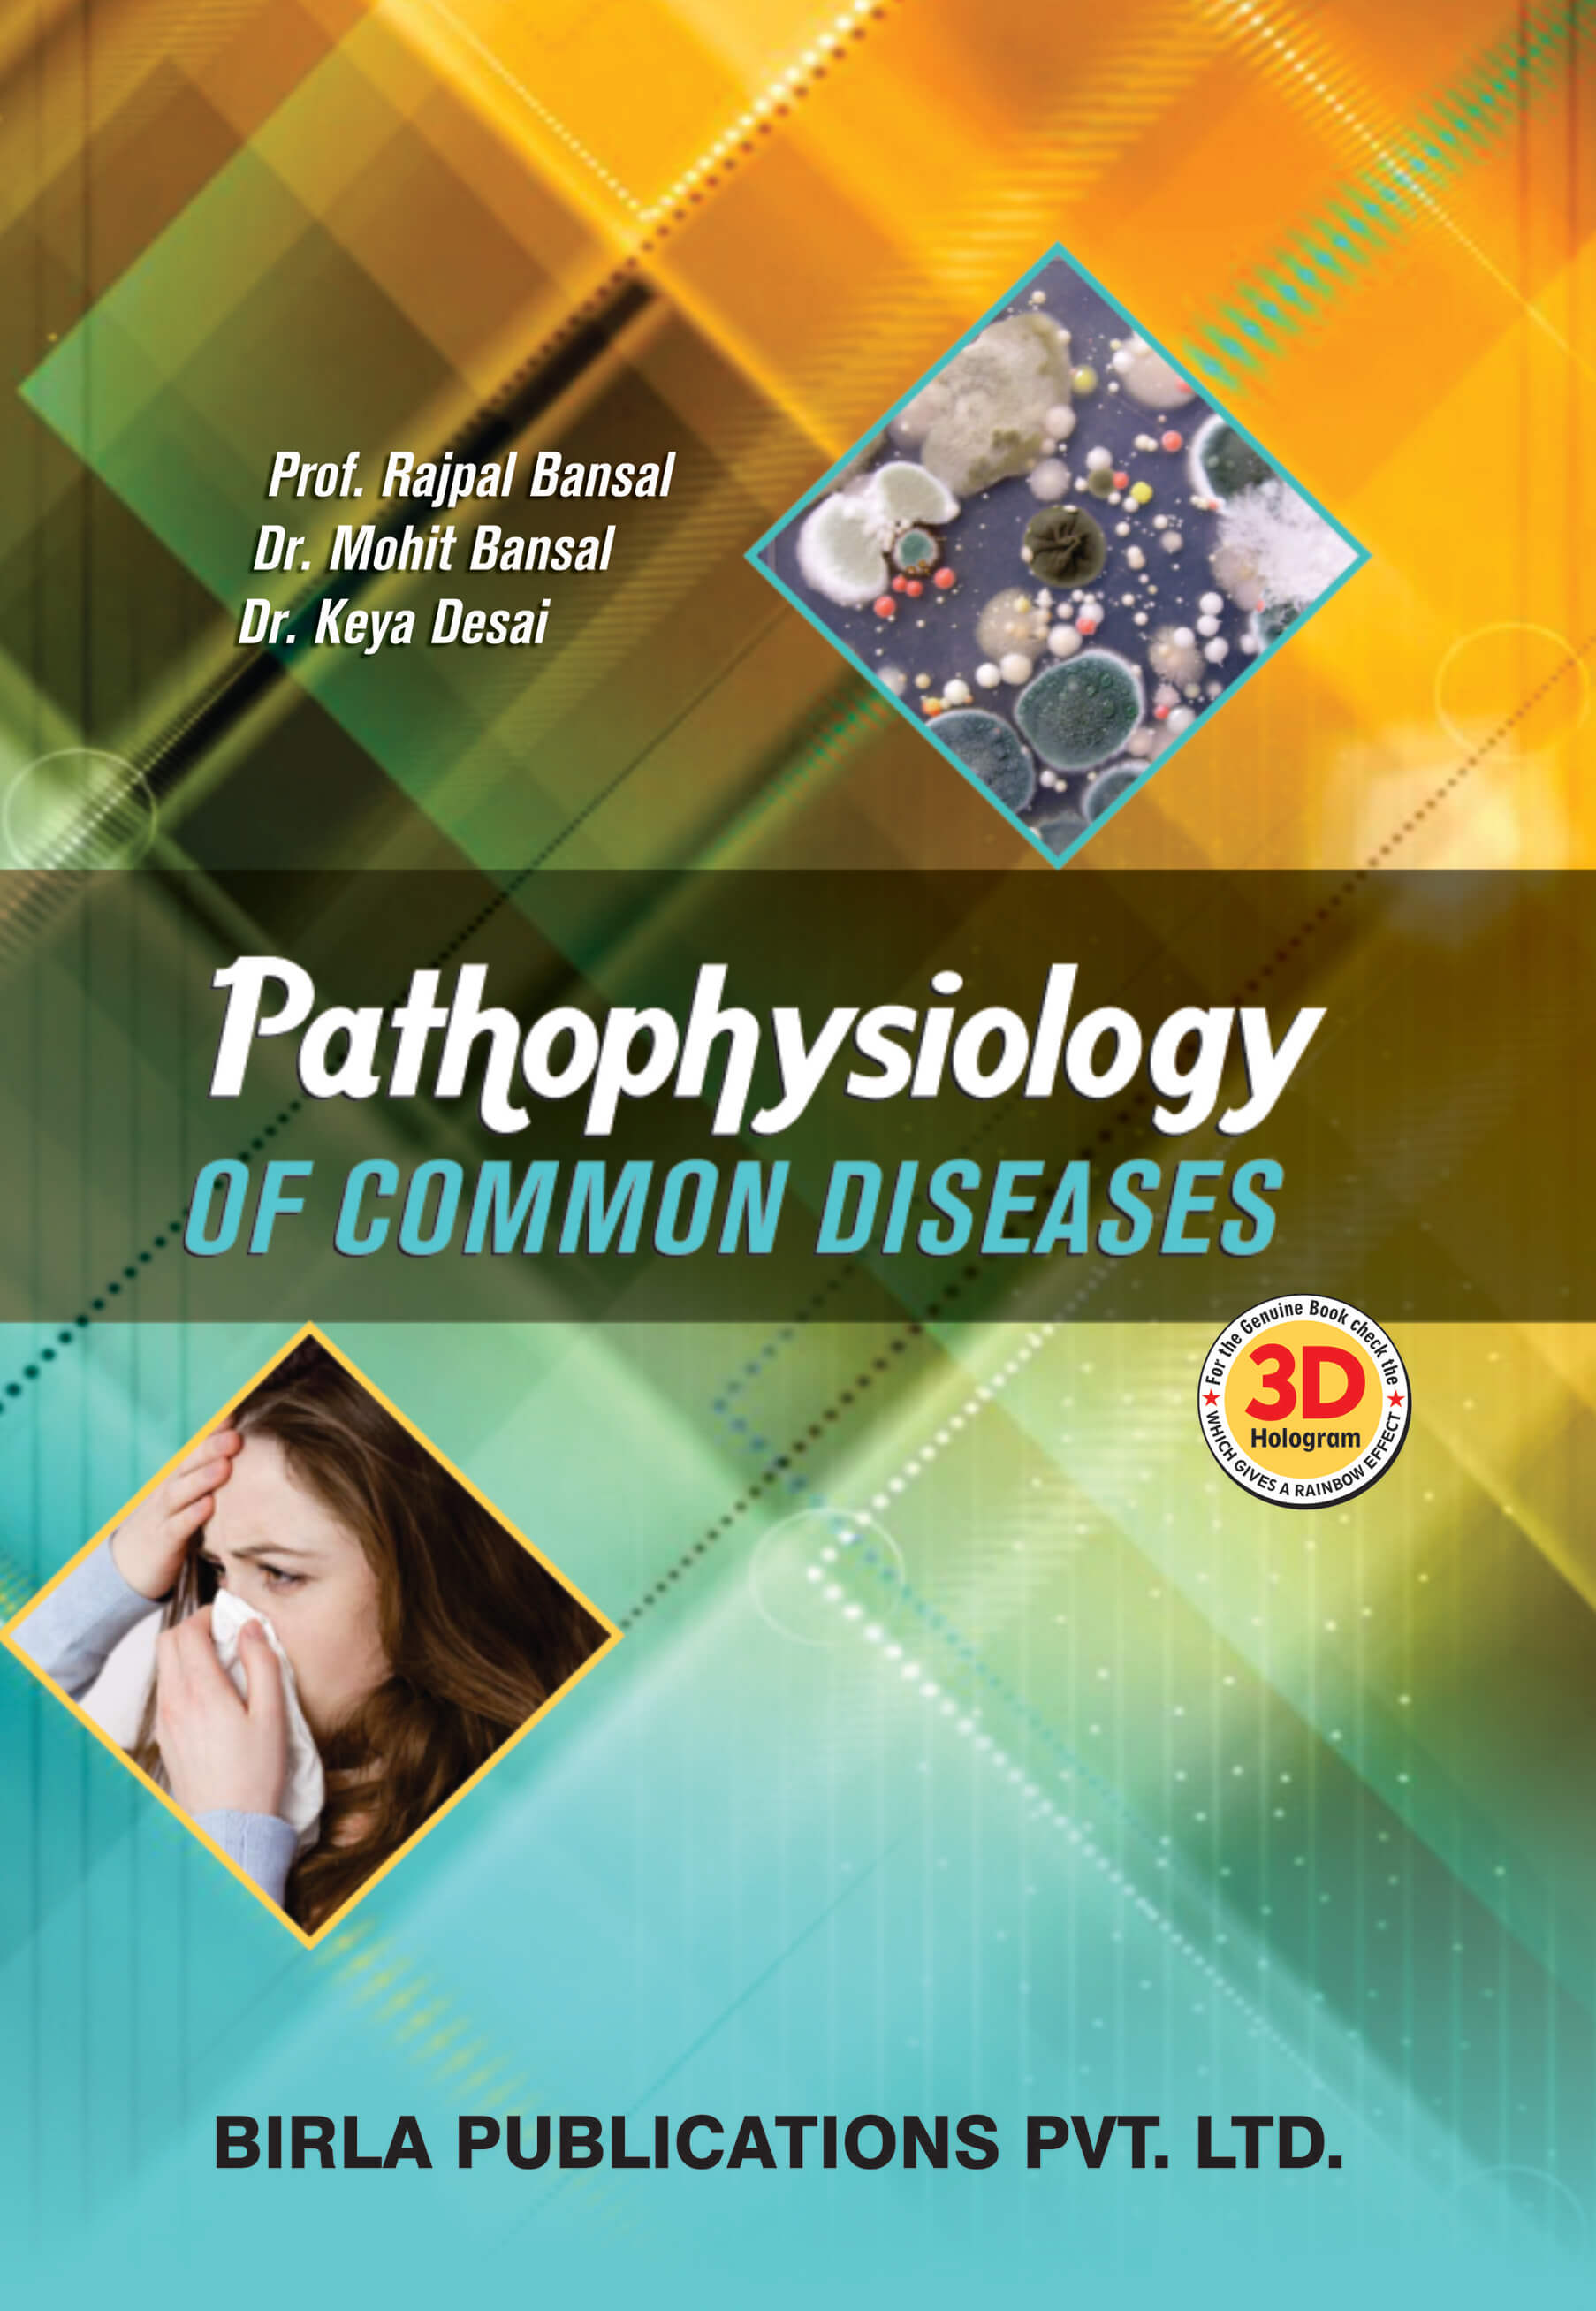 PATHOPHYSIOLOGY OF COMMON DISEASES